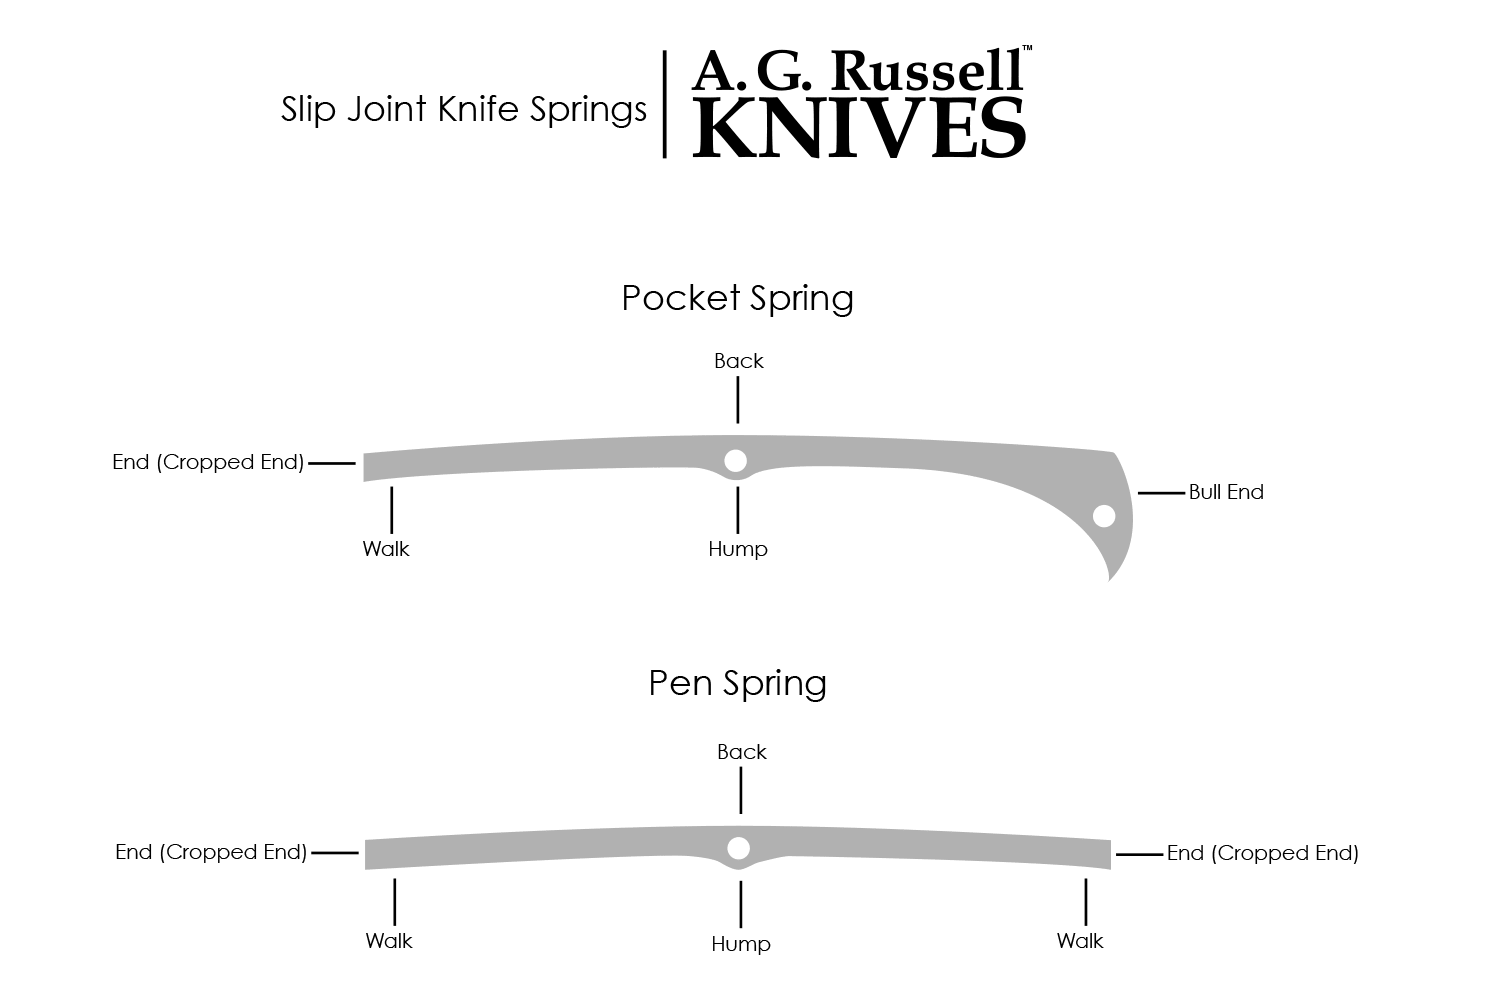 Slip Joint Knife Spring Diagrams and Terms